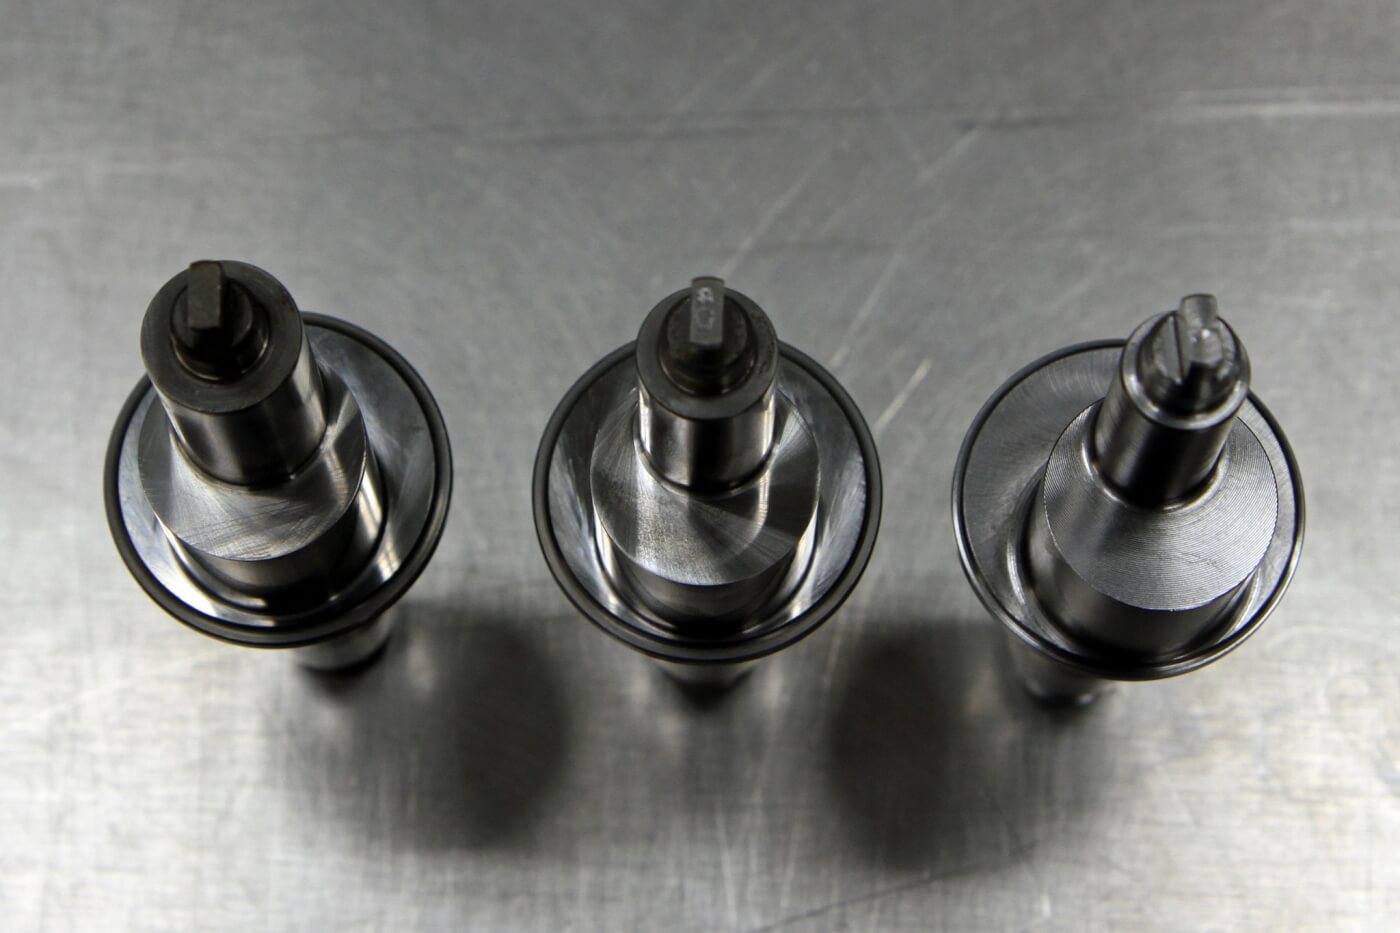 16. Here are three of the custom pump shafts S&S uses for its “Stroker” pumps. Notice that the base circle of the cam has a larger stroke as you move from the shaft on the left to the larger ones in the center and on the right. These are the 10mm, 12mm and 14mm shafts (from left to right) used in their high performance CP3 pumps.